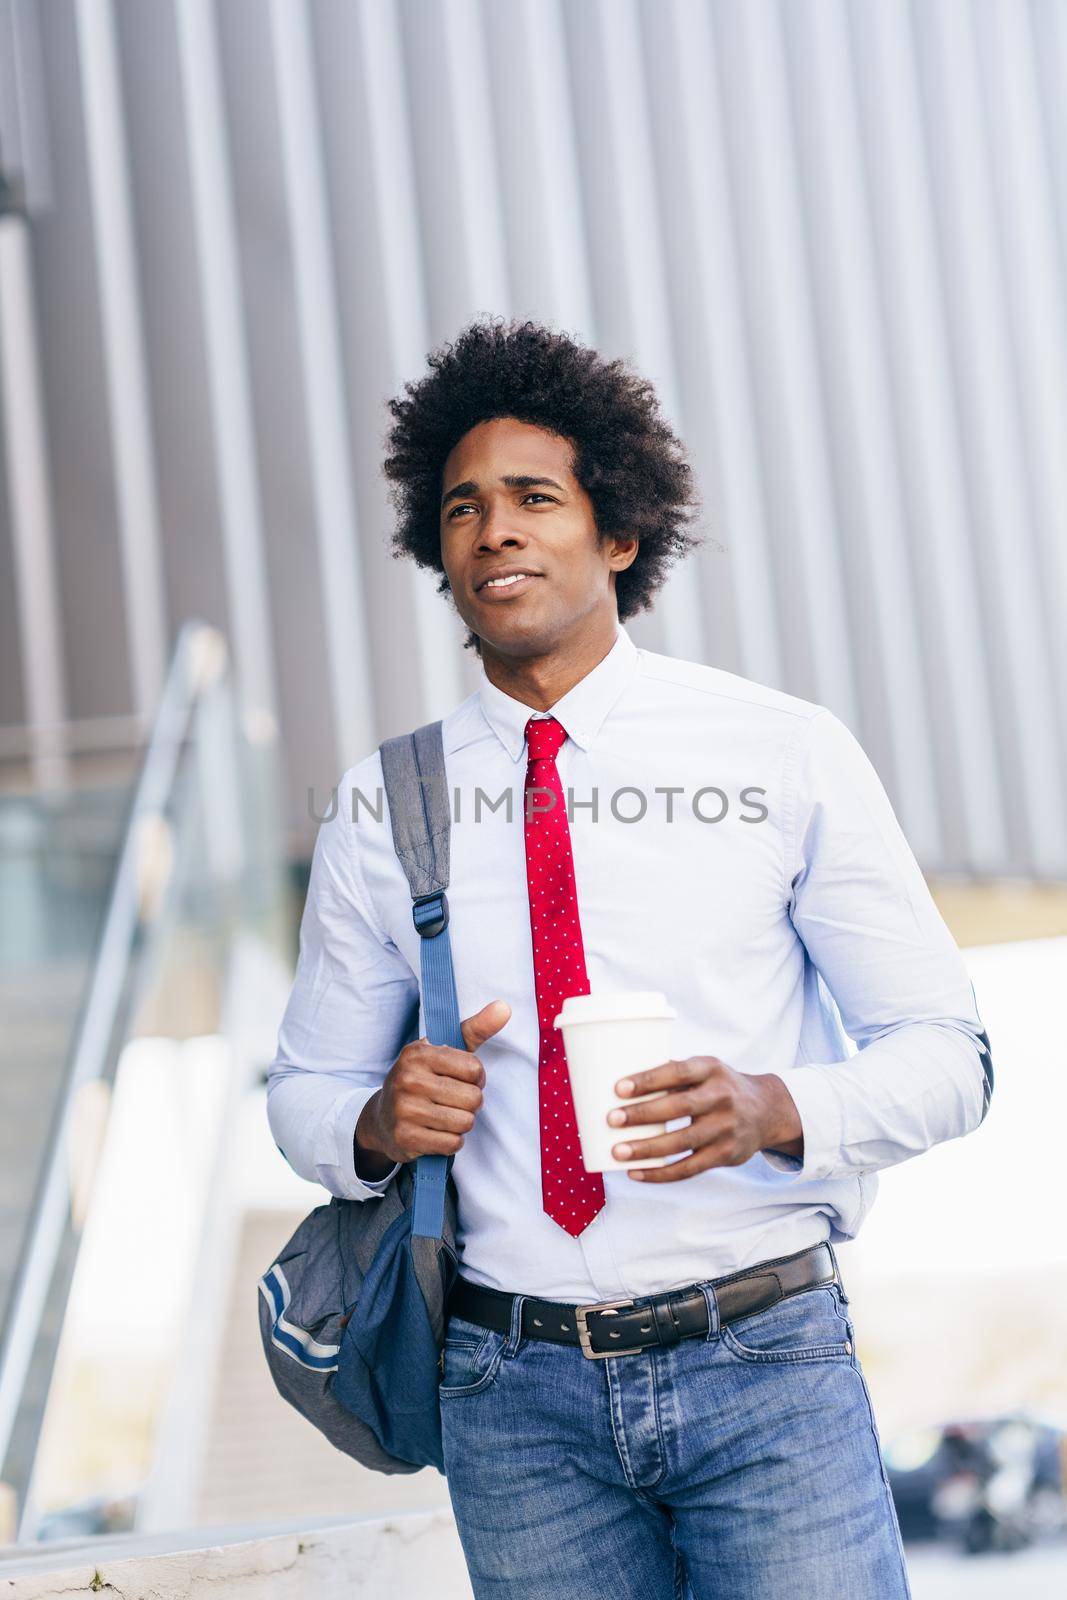 Black Businessman walking down the street with a take-away glass. Man with afro hair.